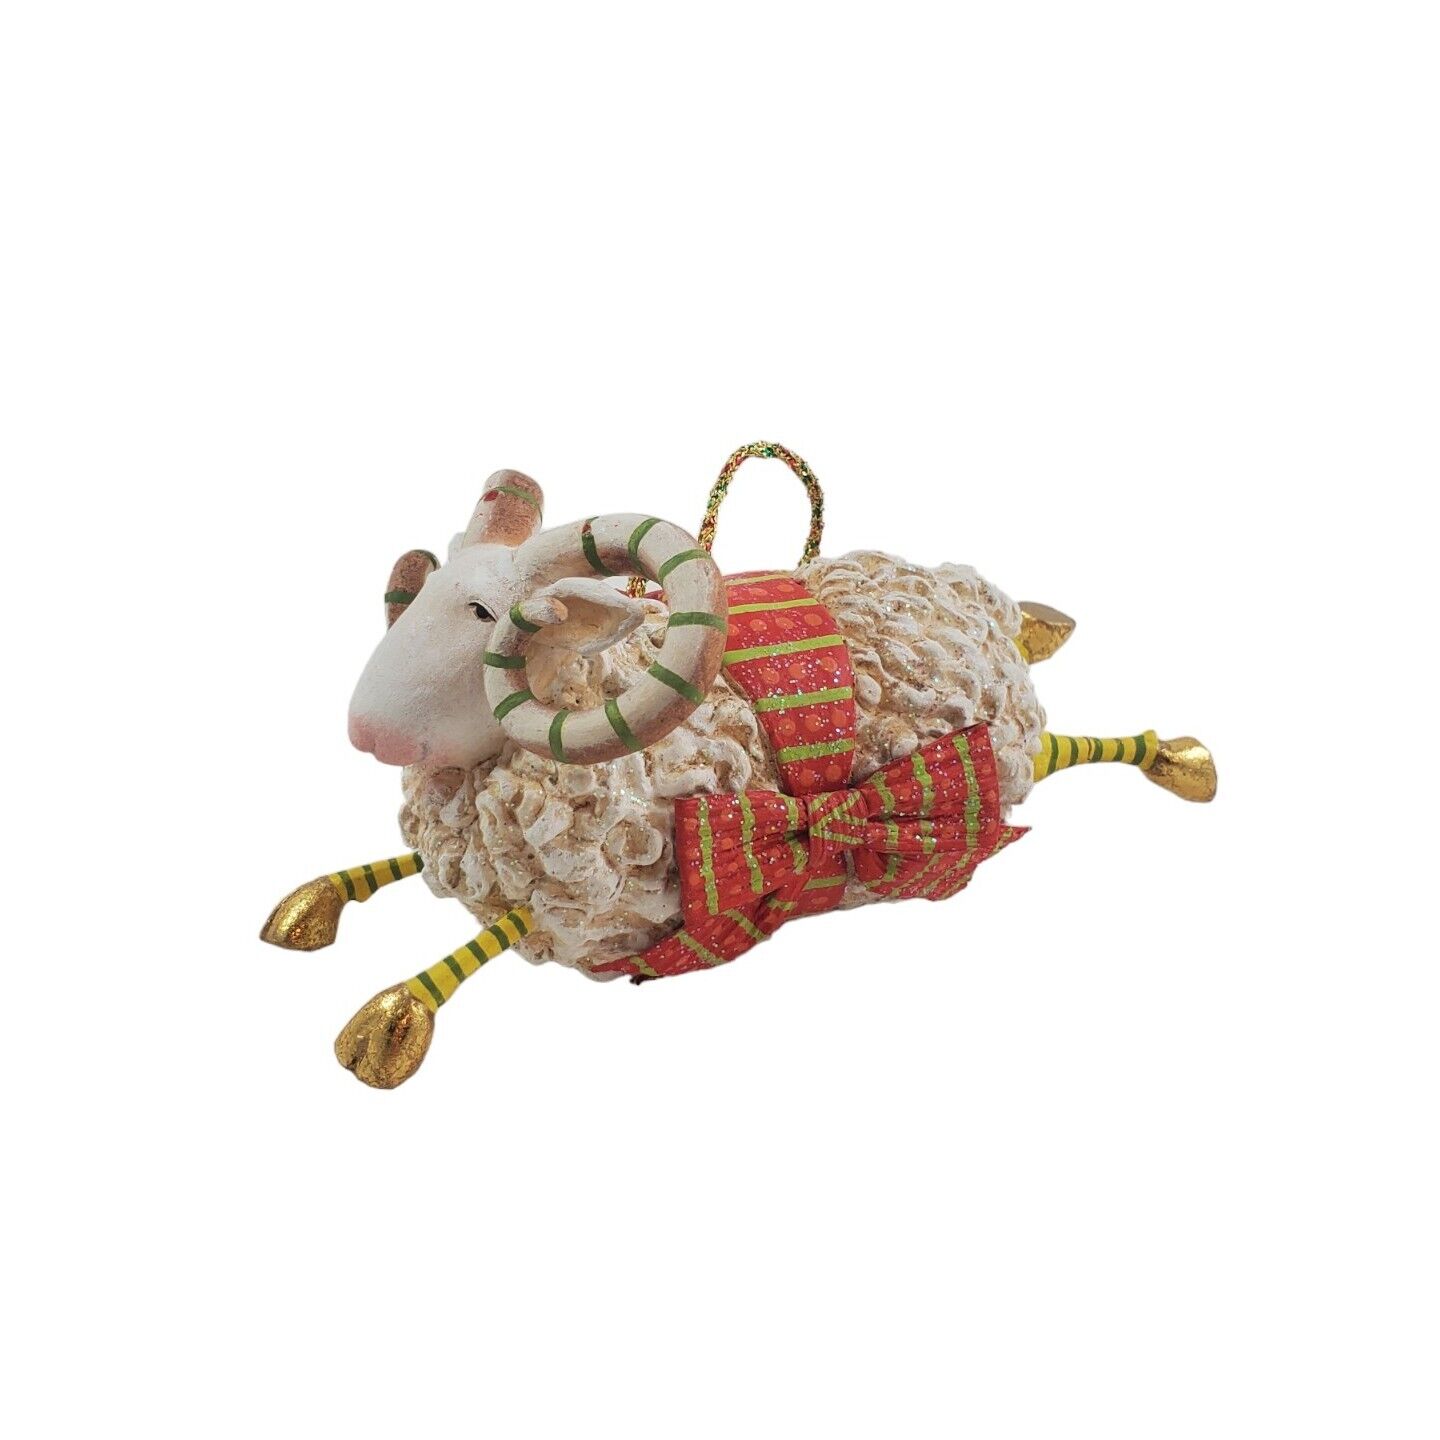 Patience Brewster Krinkles Sheep Ornament Happy Ram Christmas Decor Whimsical 6\